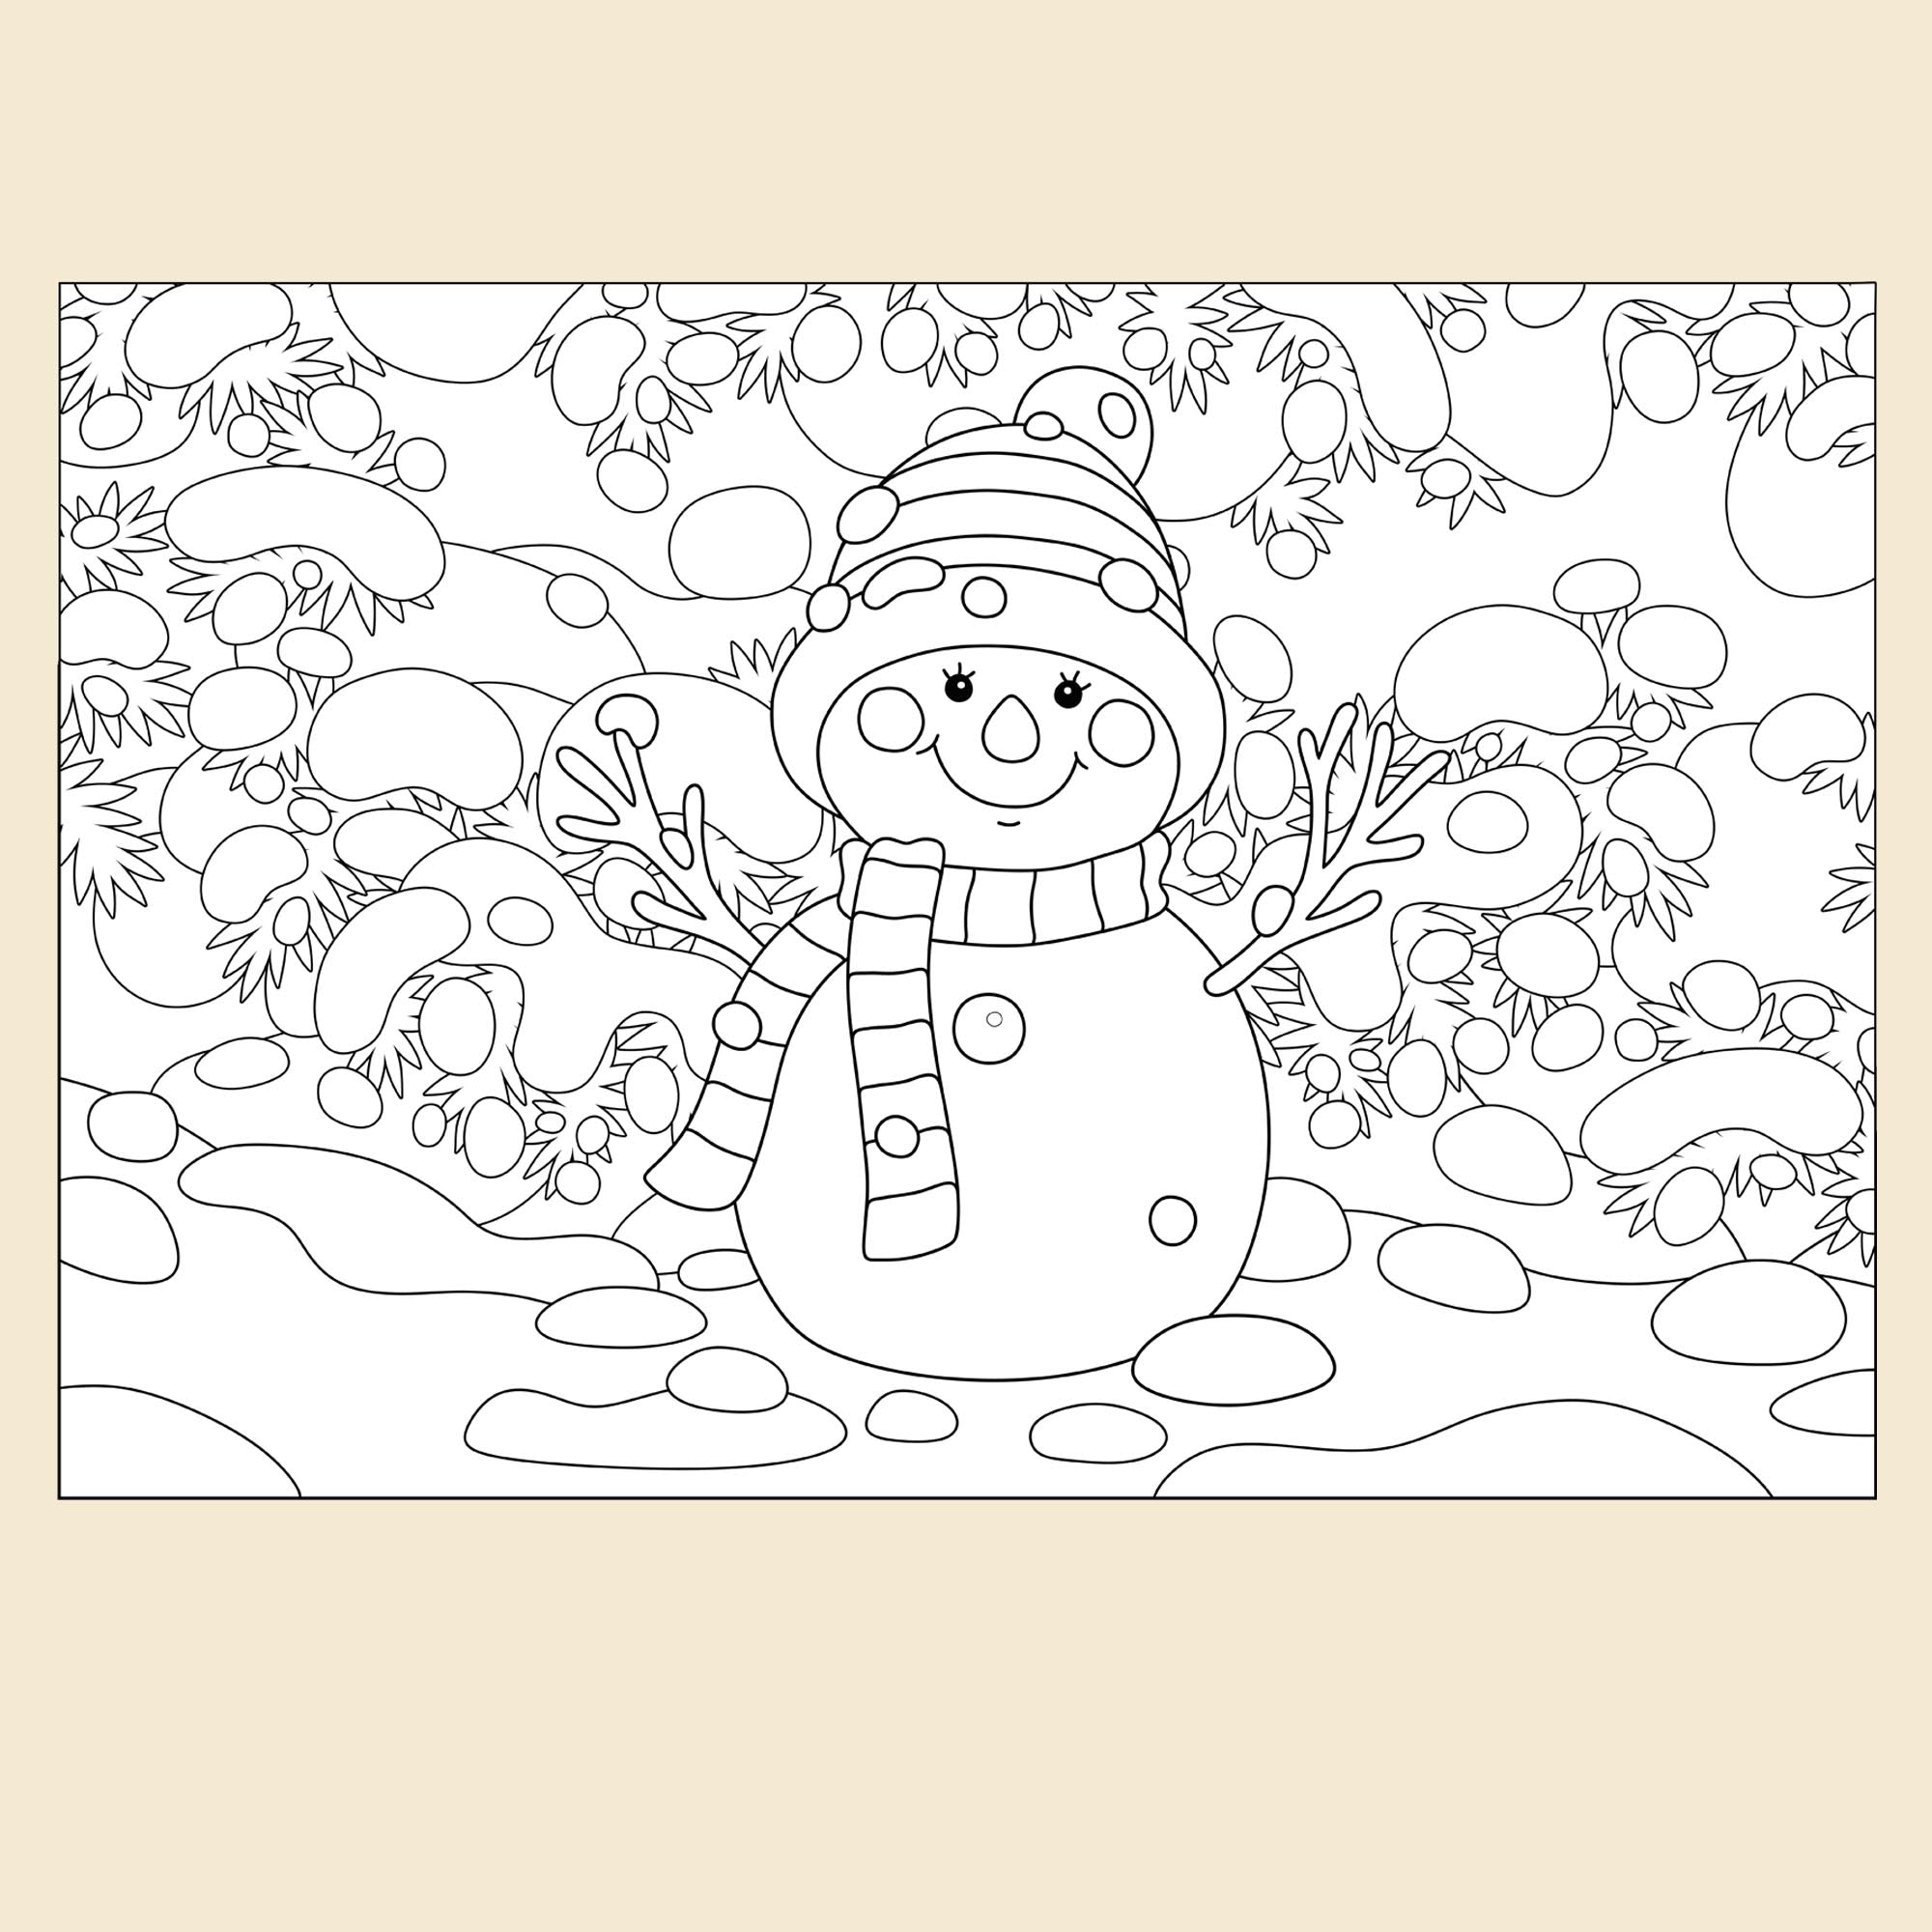 Snowman - Coloring Page